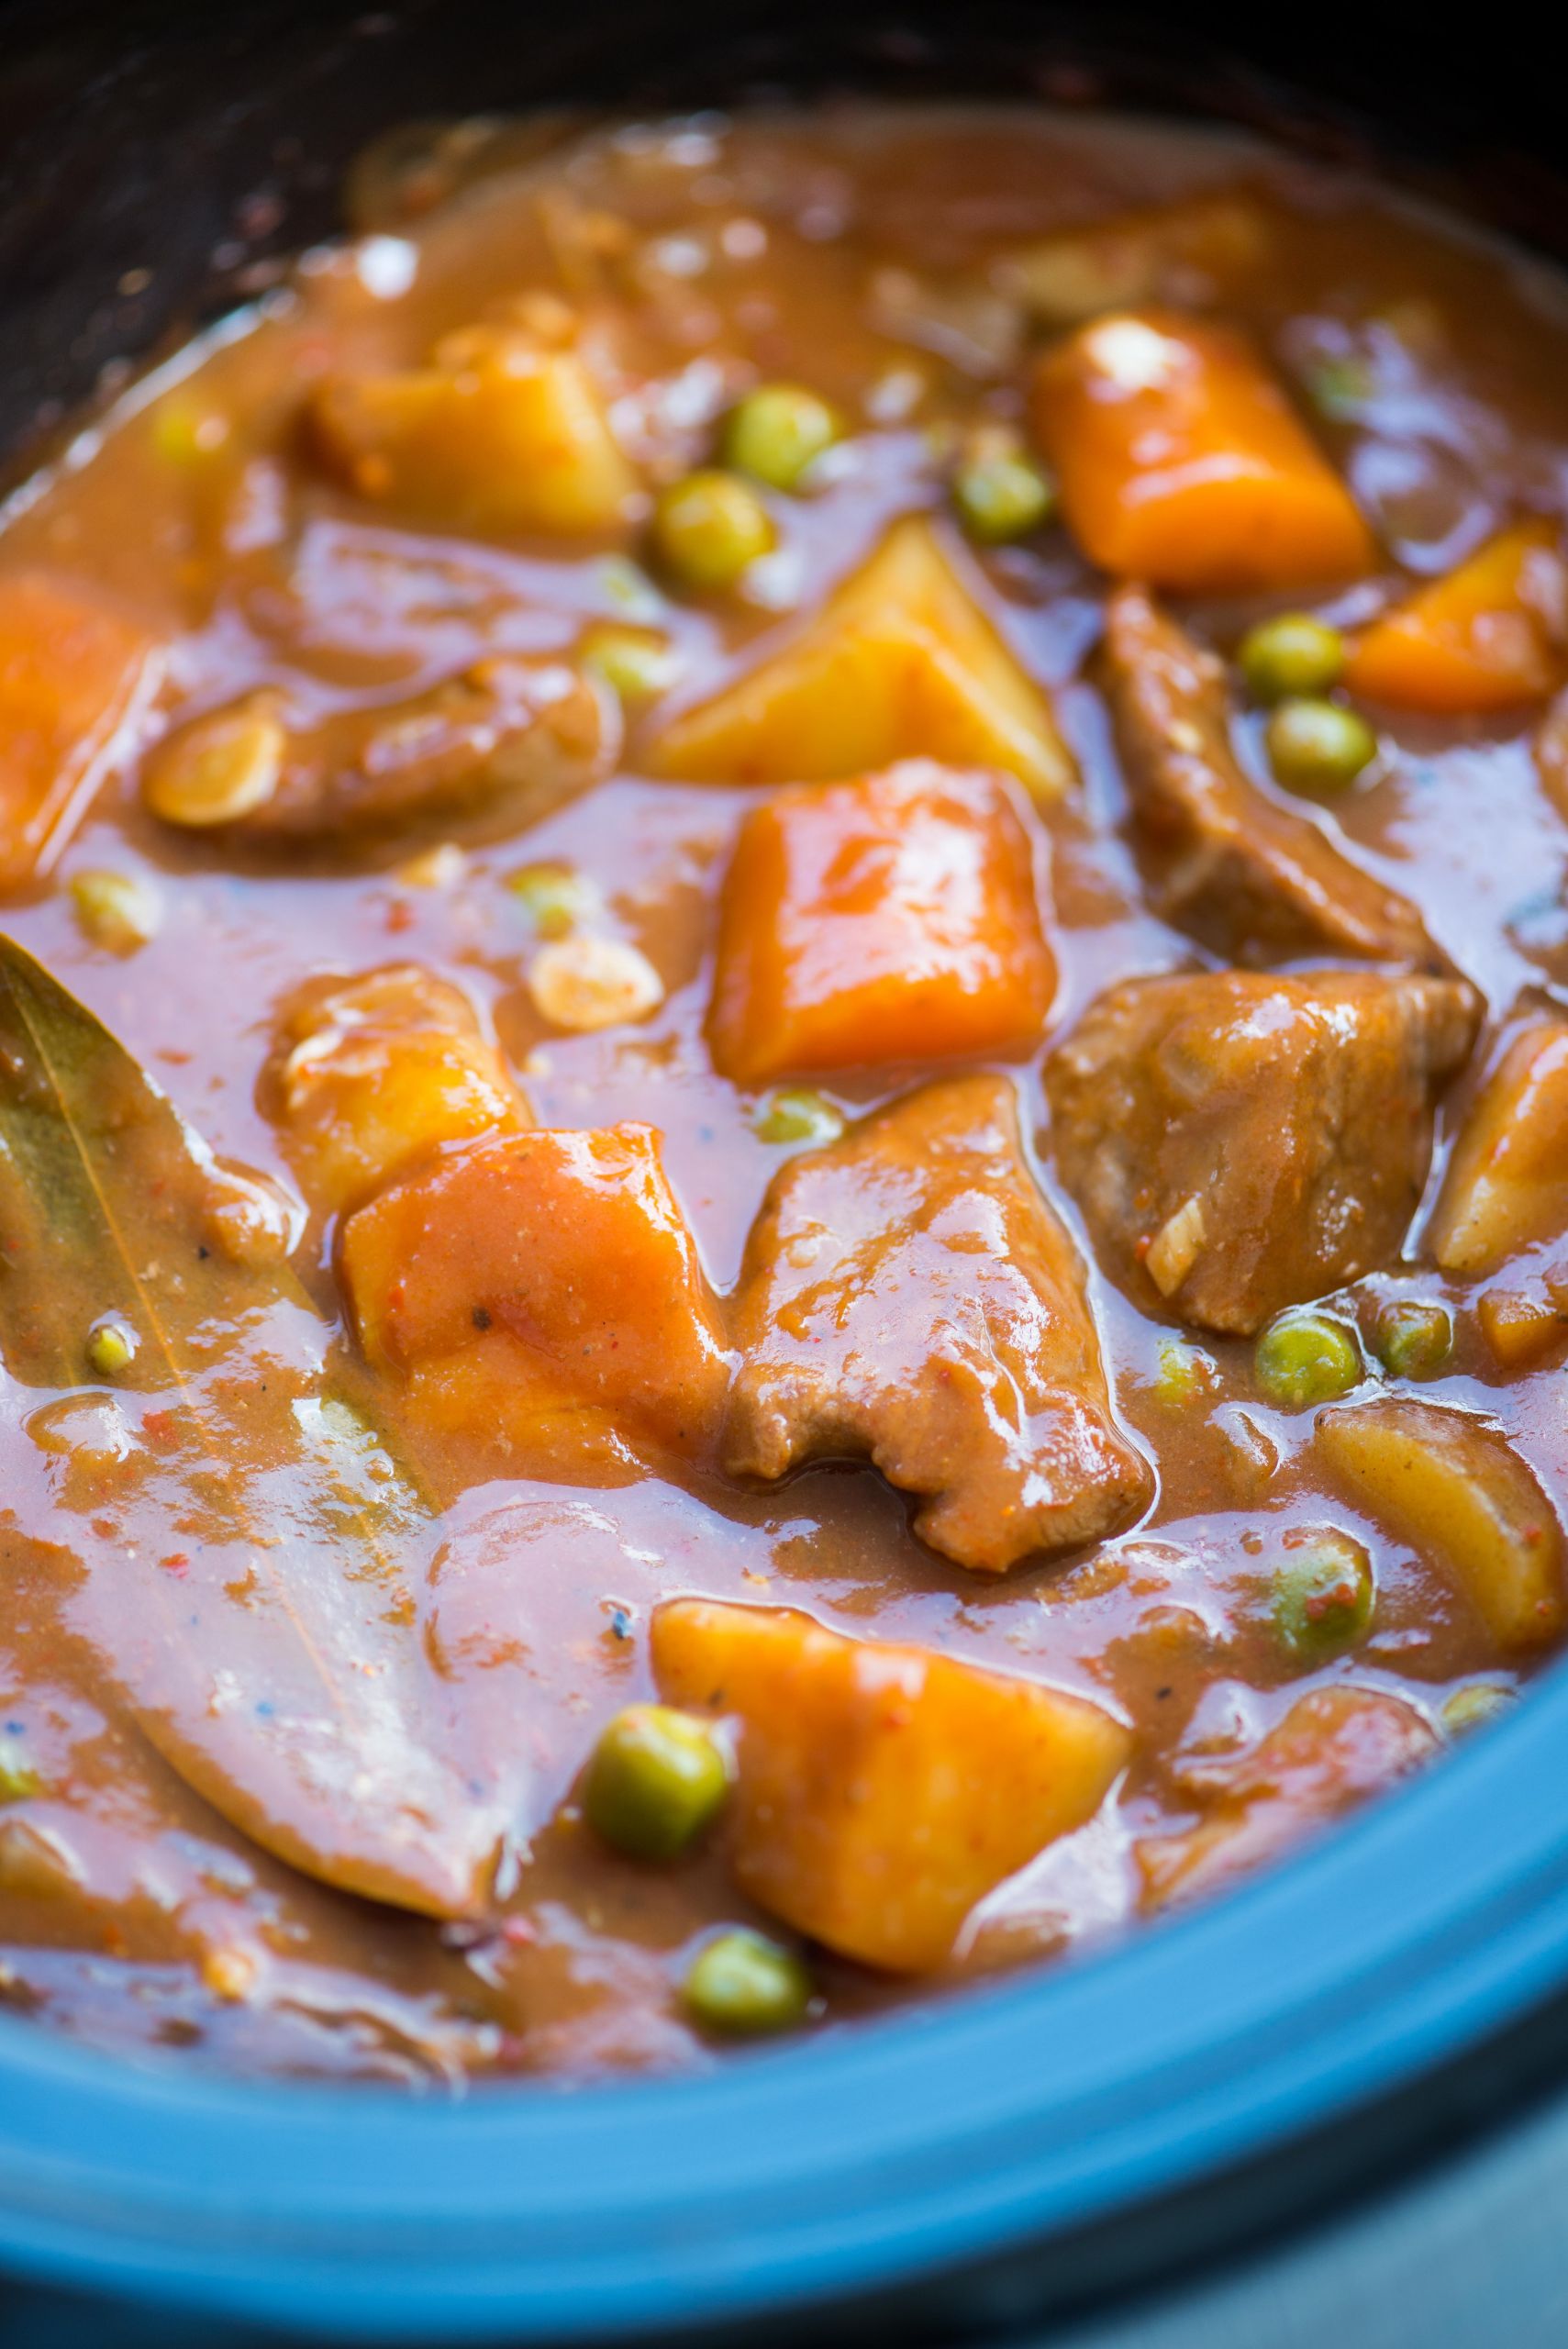 Lamb Stew Slow Cooker Recipe
 SLOW COOKER LAMB STEW The flavours of kitchen